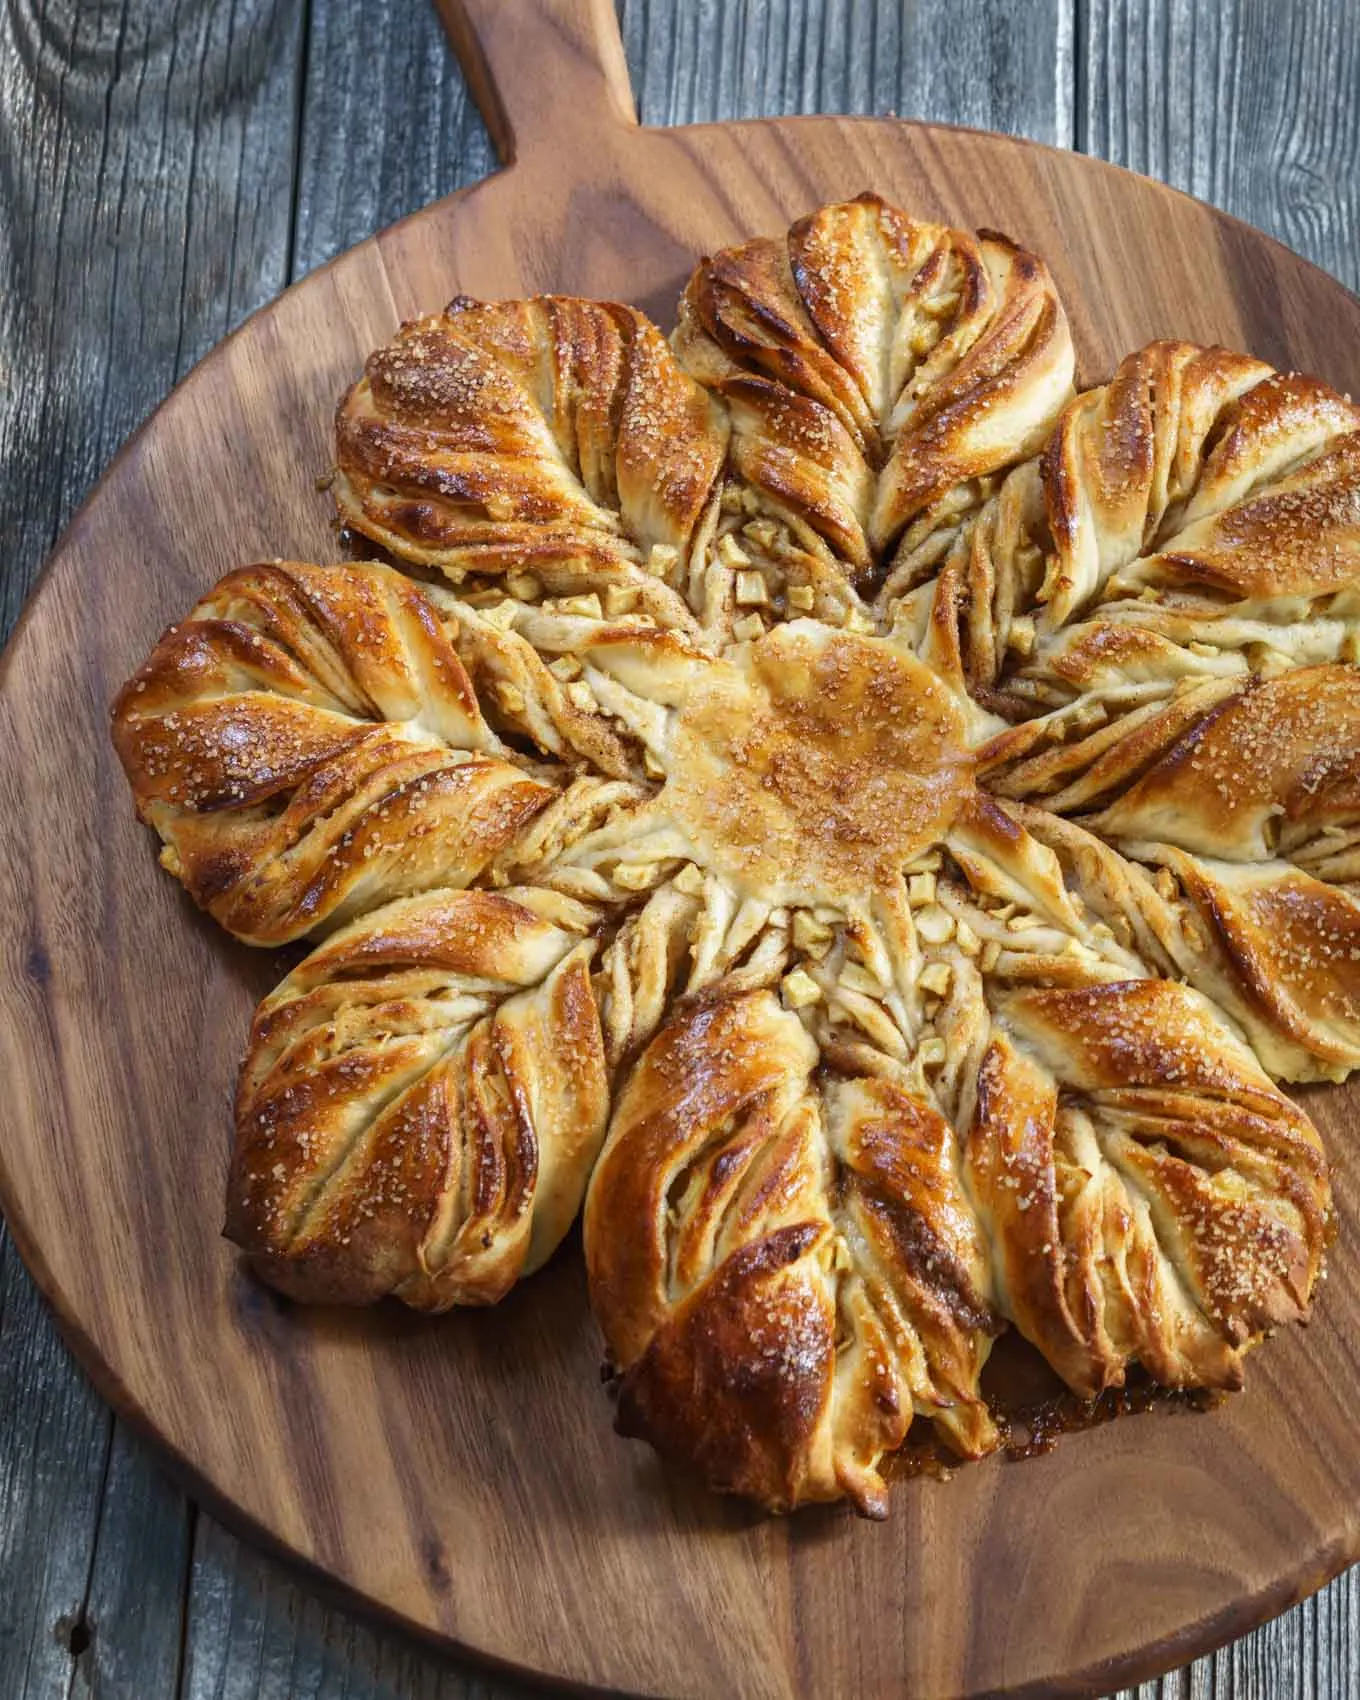 Top view of apple bread twisted into the shape of a star on a wooden cutting board.